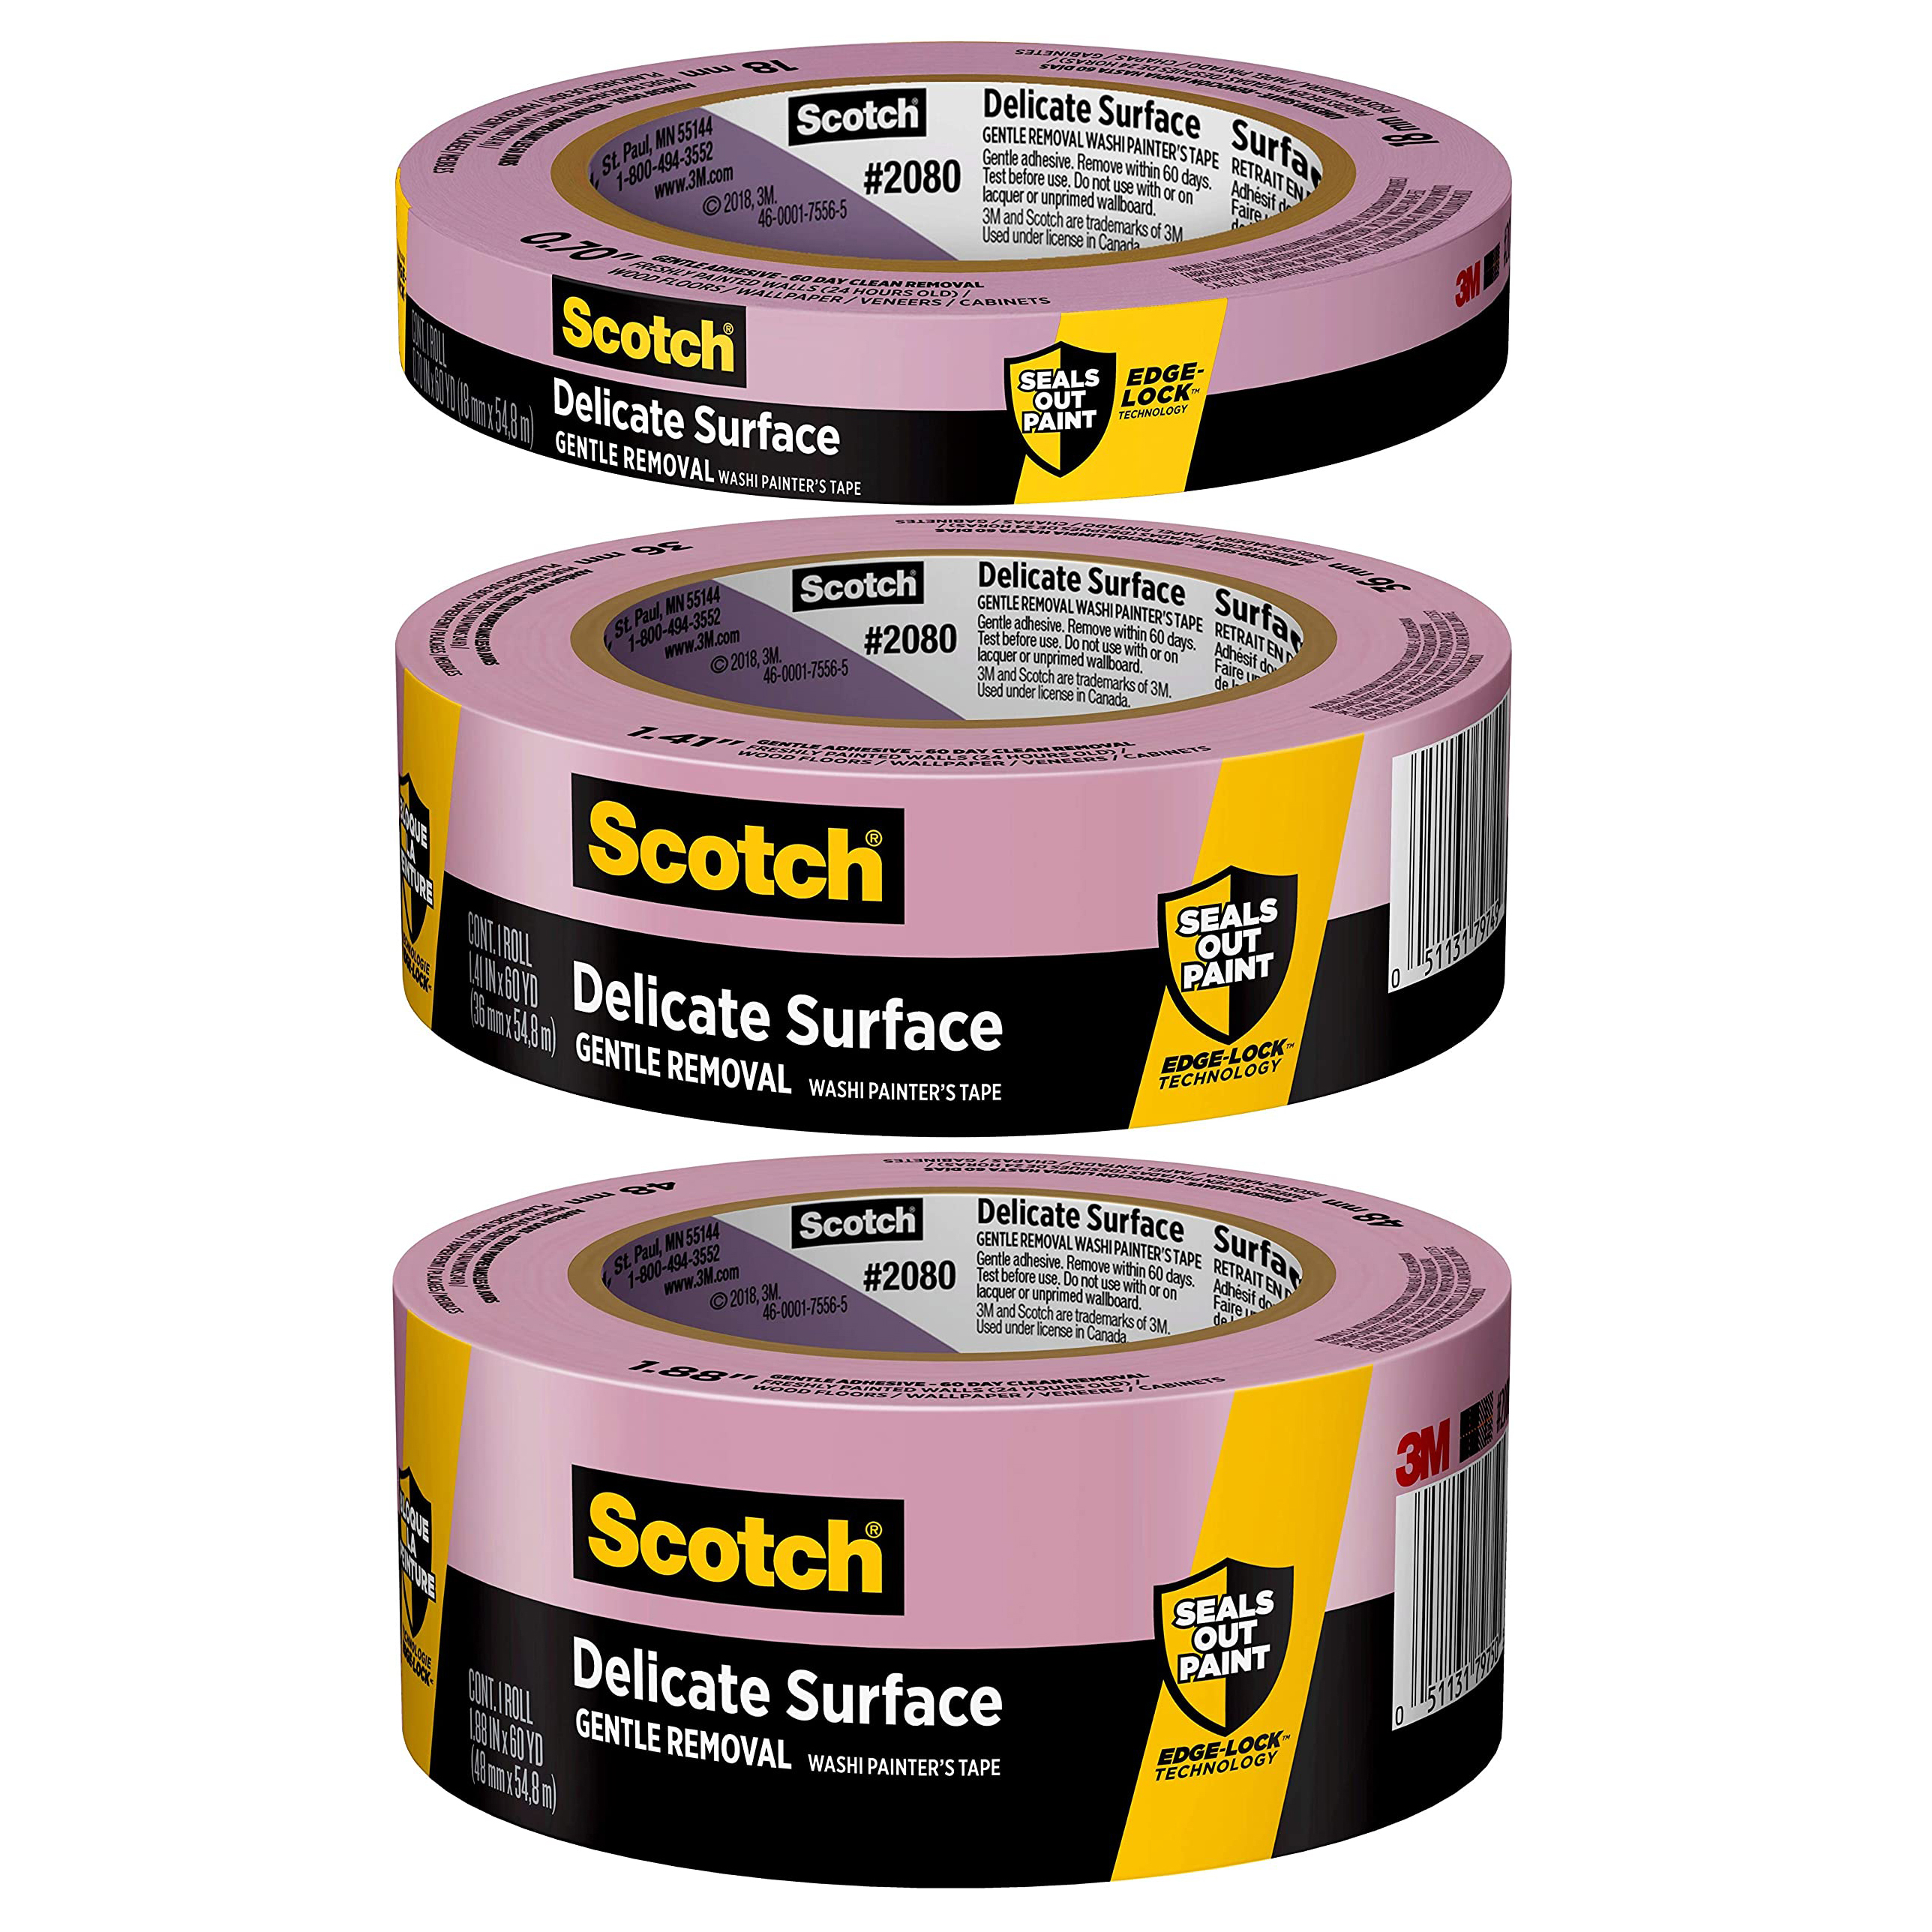 6C6-007-2*A Scotch Safe-Release Painter's Masking Tape-.75"X60yd 